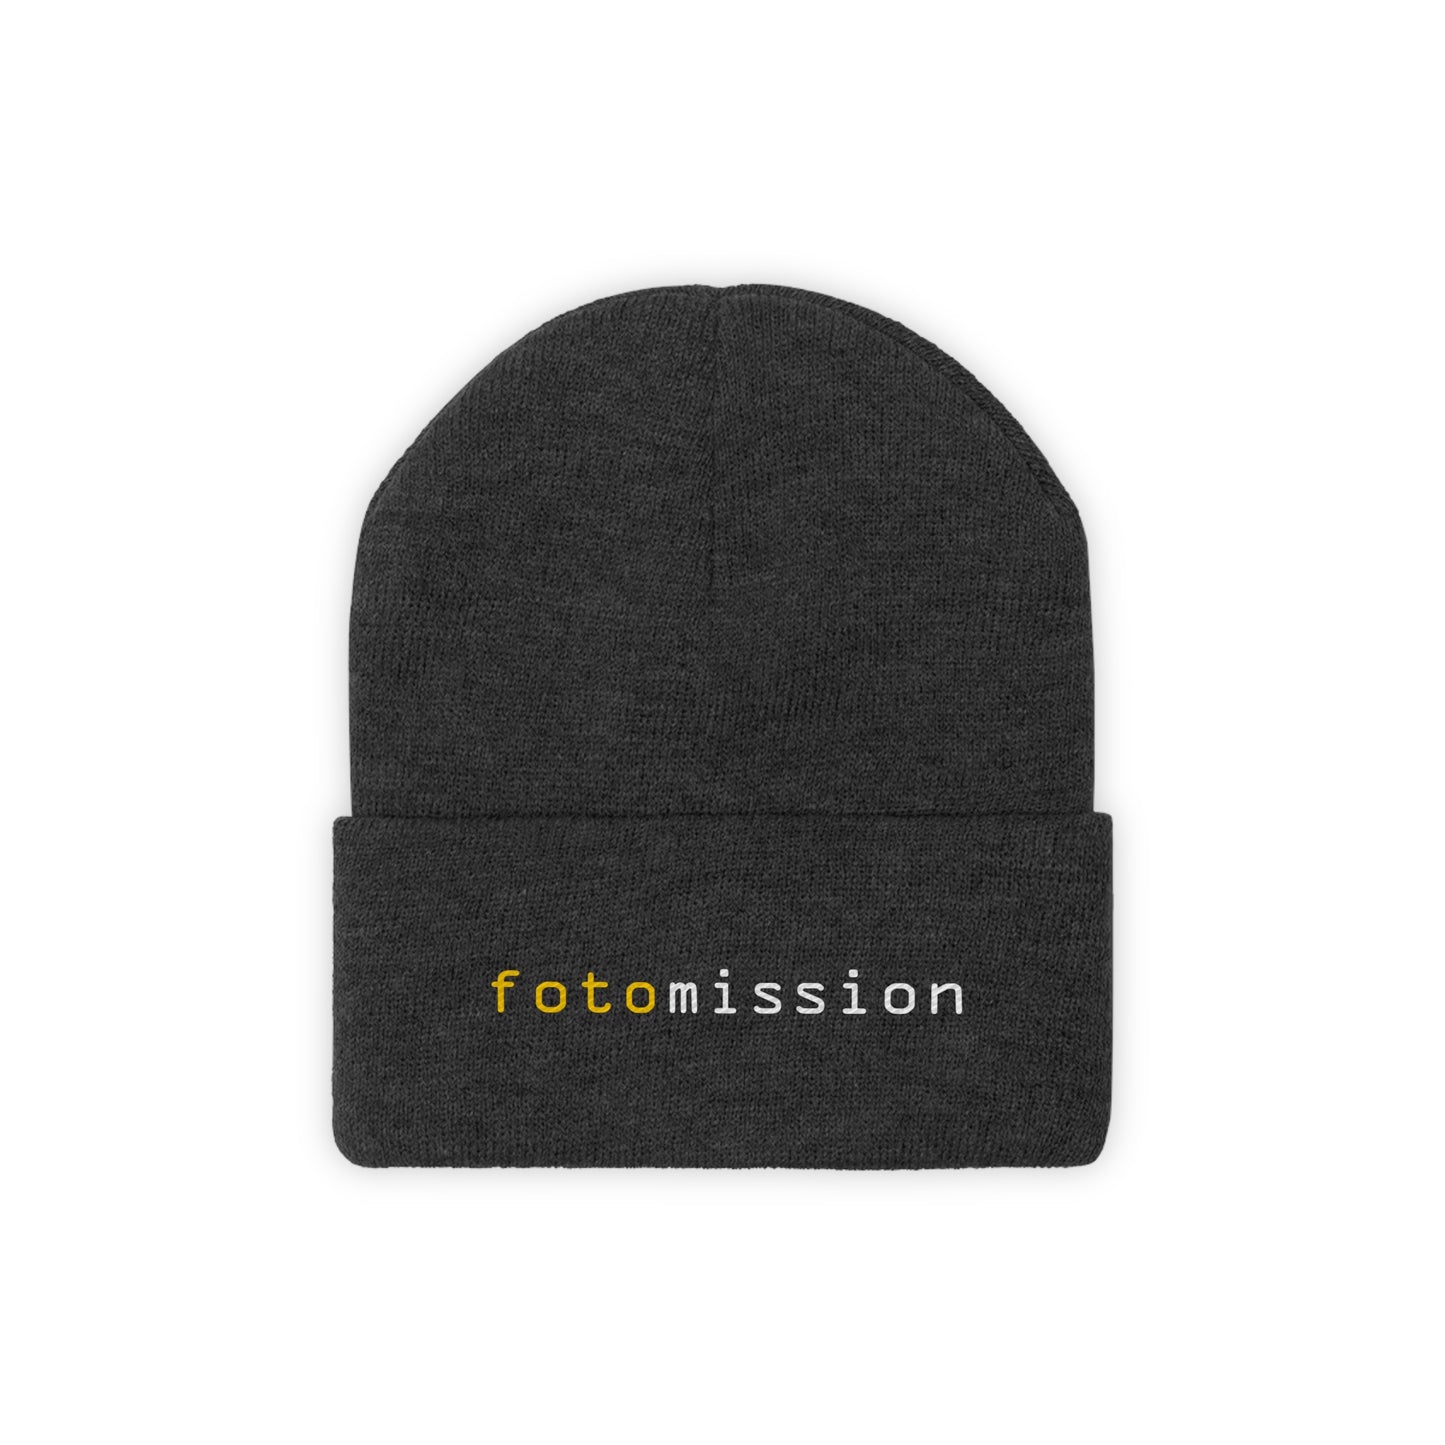 fotomission Knit Beanie